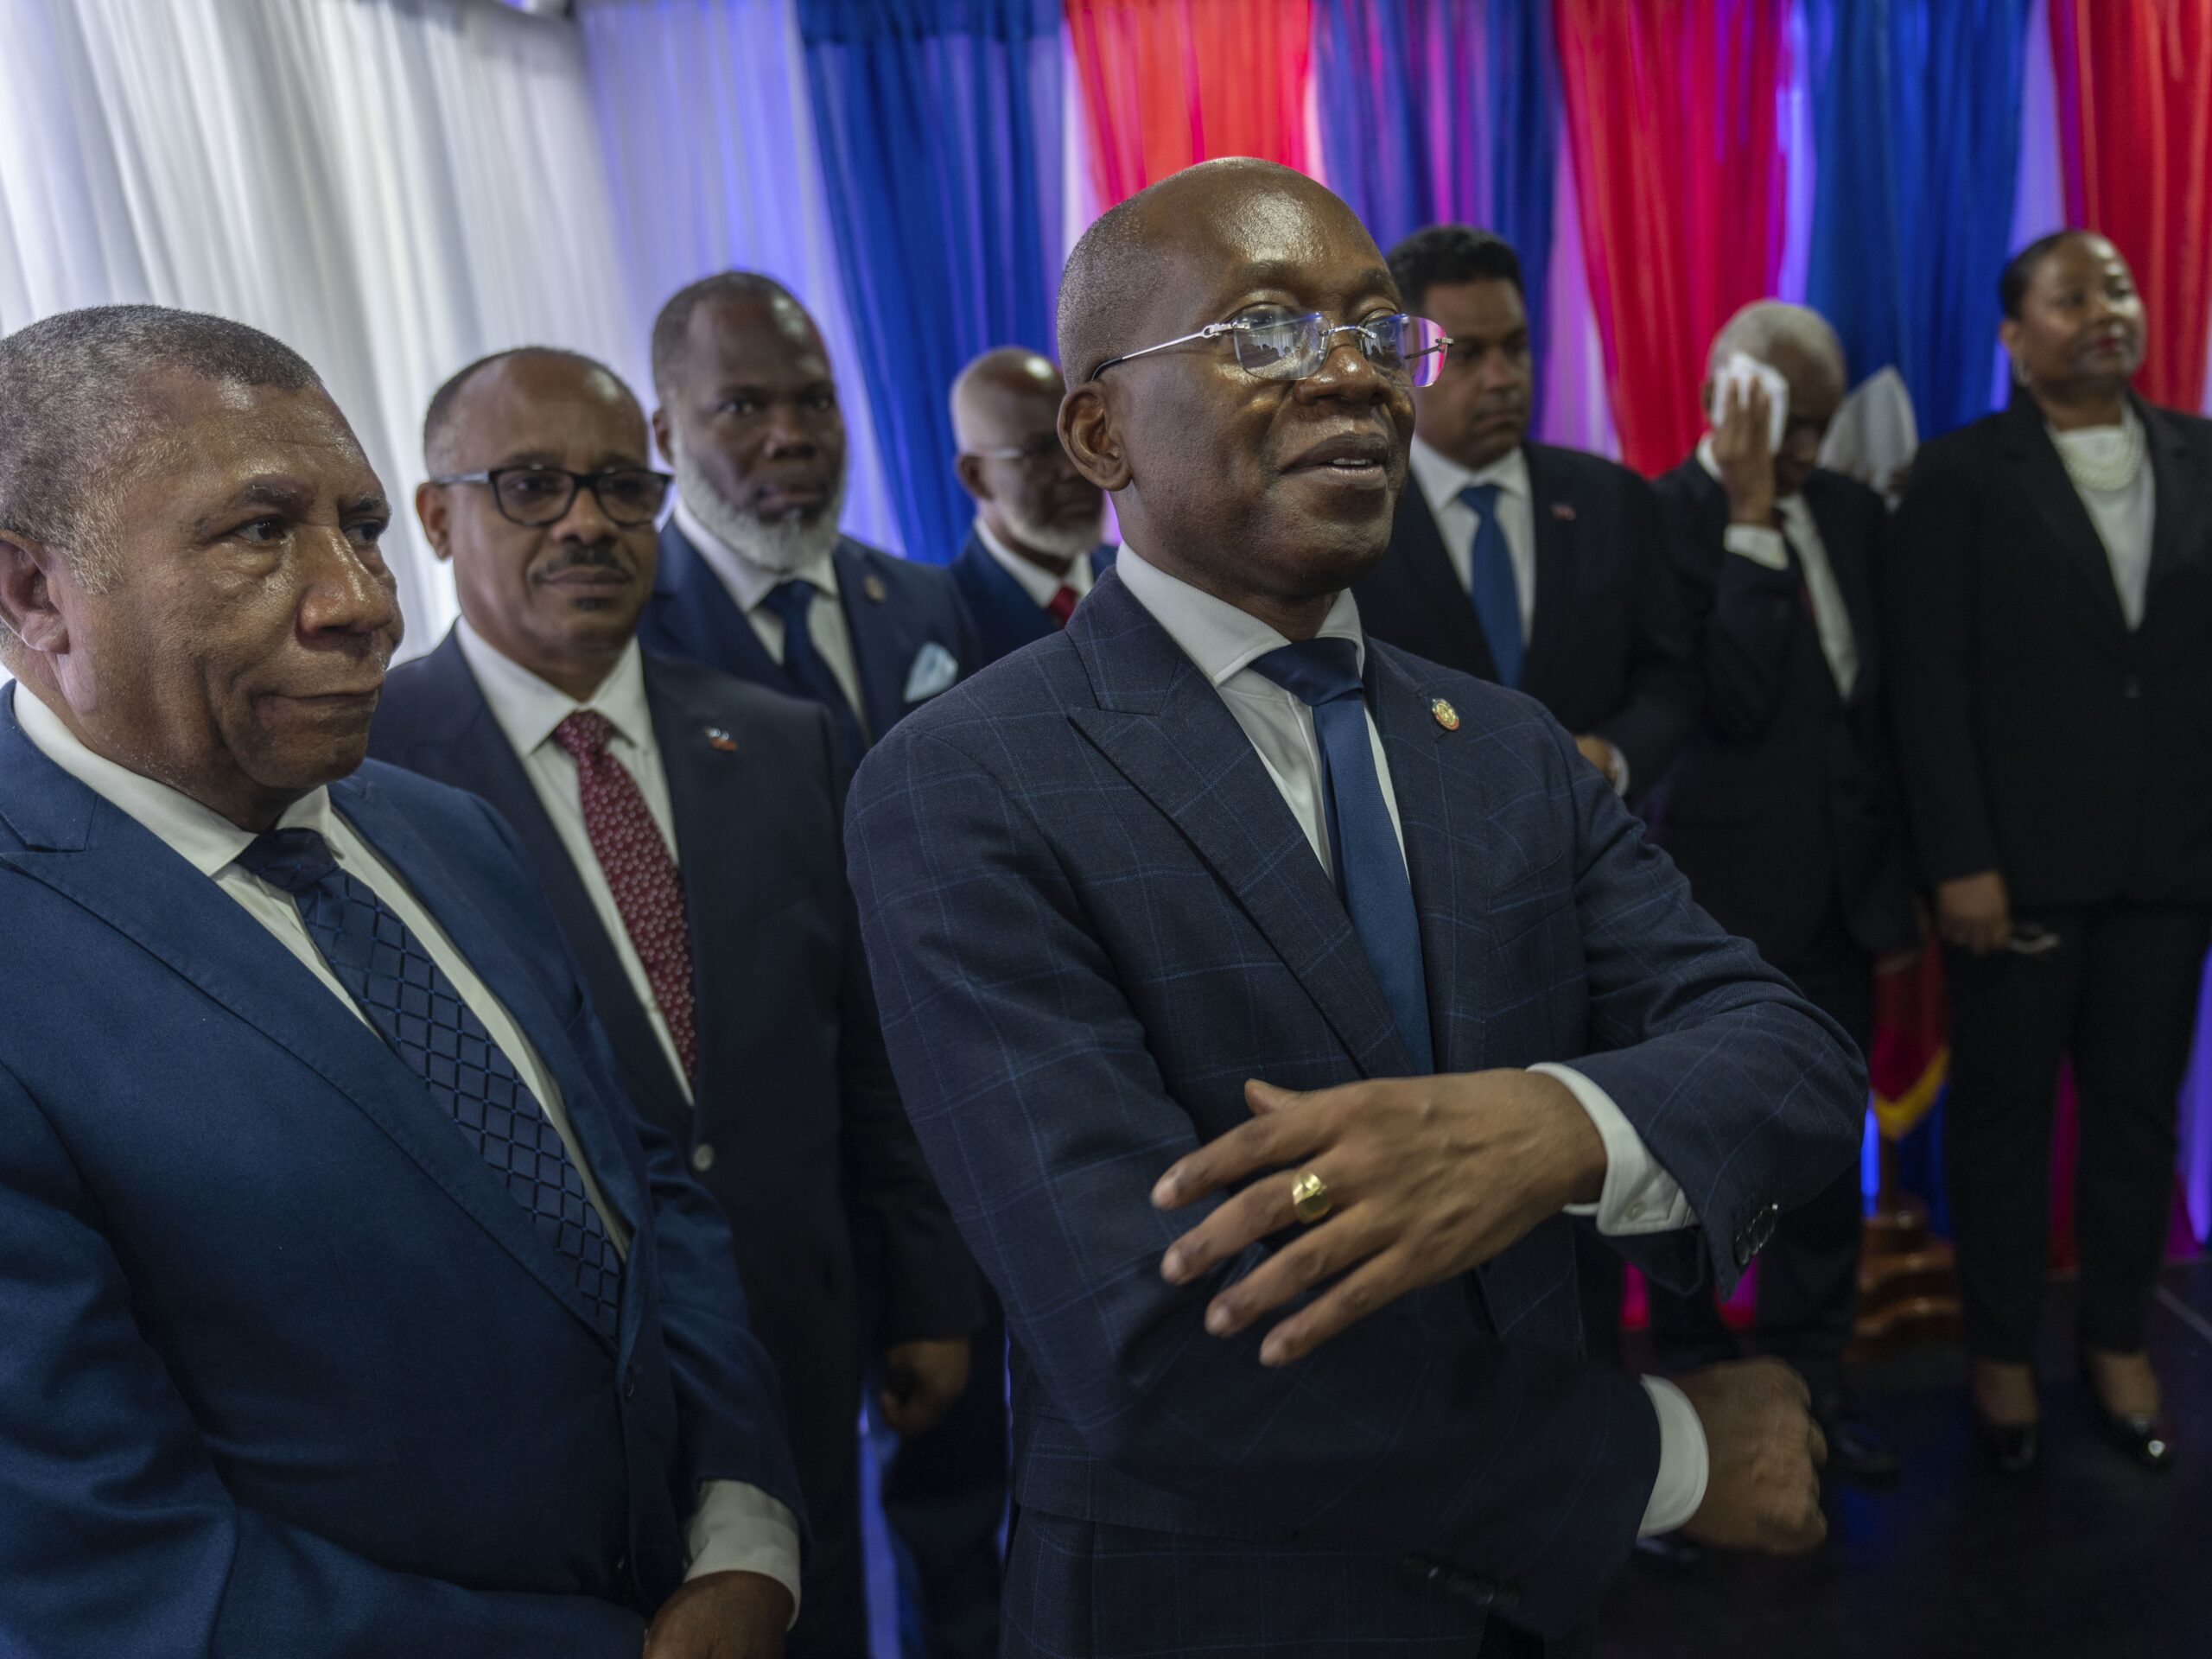 Haiti’s Prime Minister Ariel Henry has resigned as a transitional council takes over